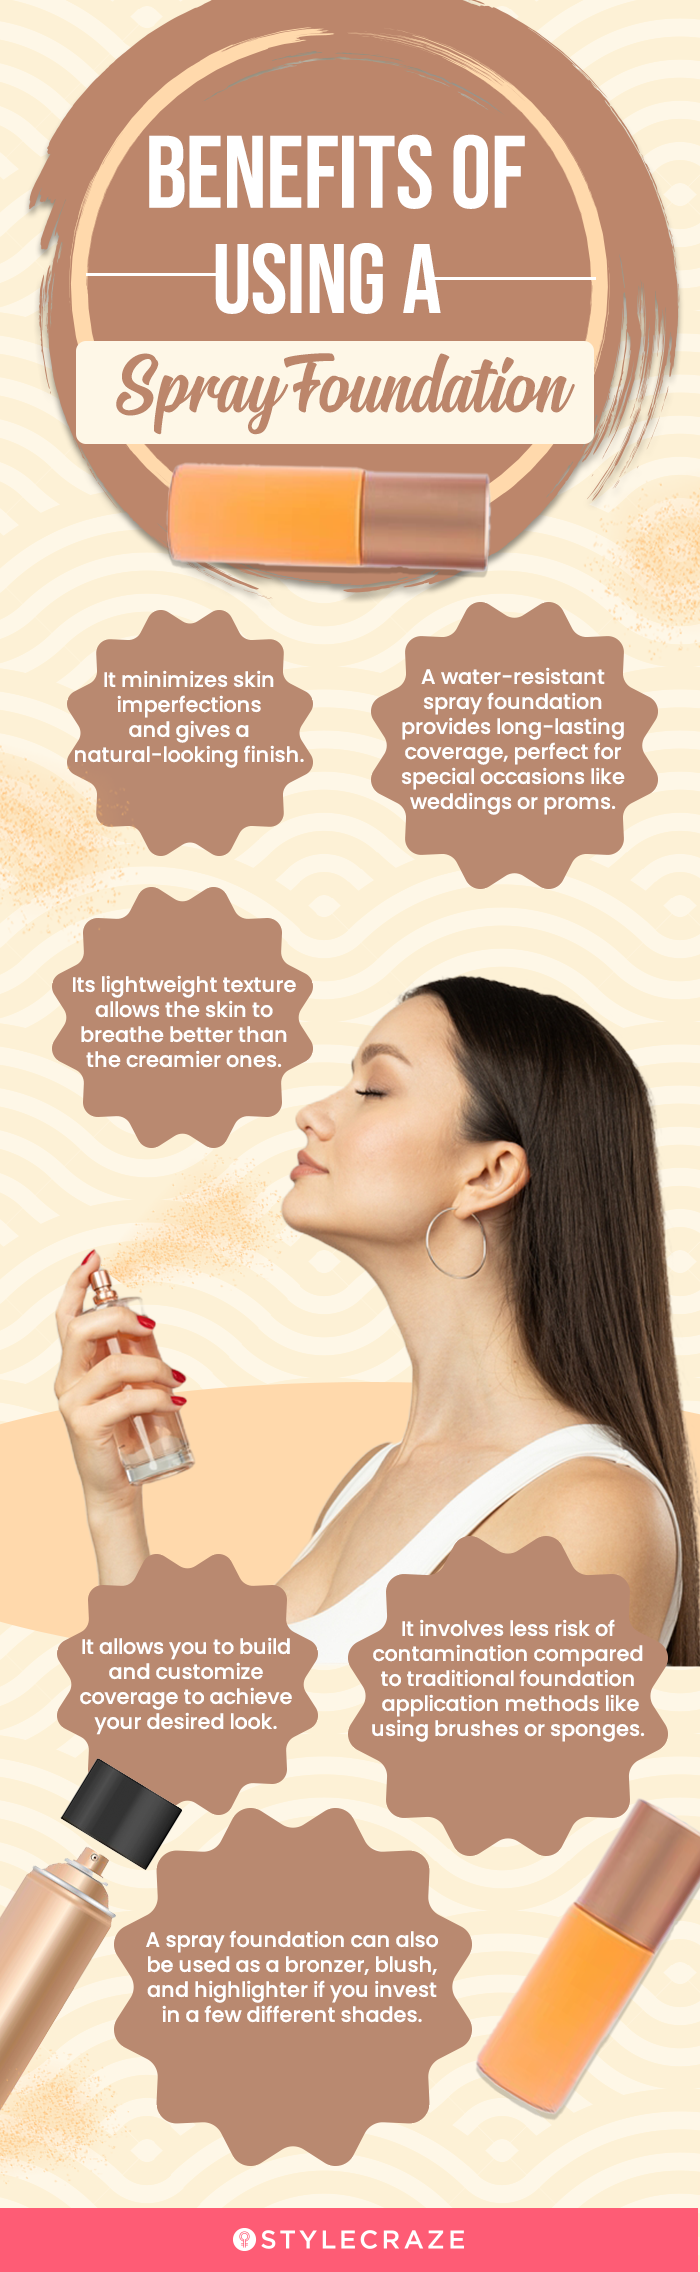 Benefits Of Using A Spray Foundation(infographic)